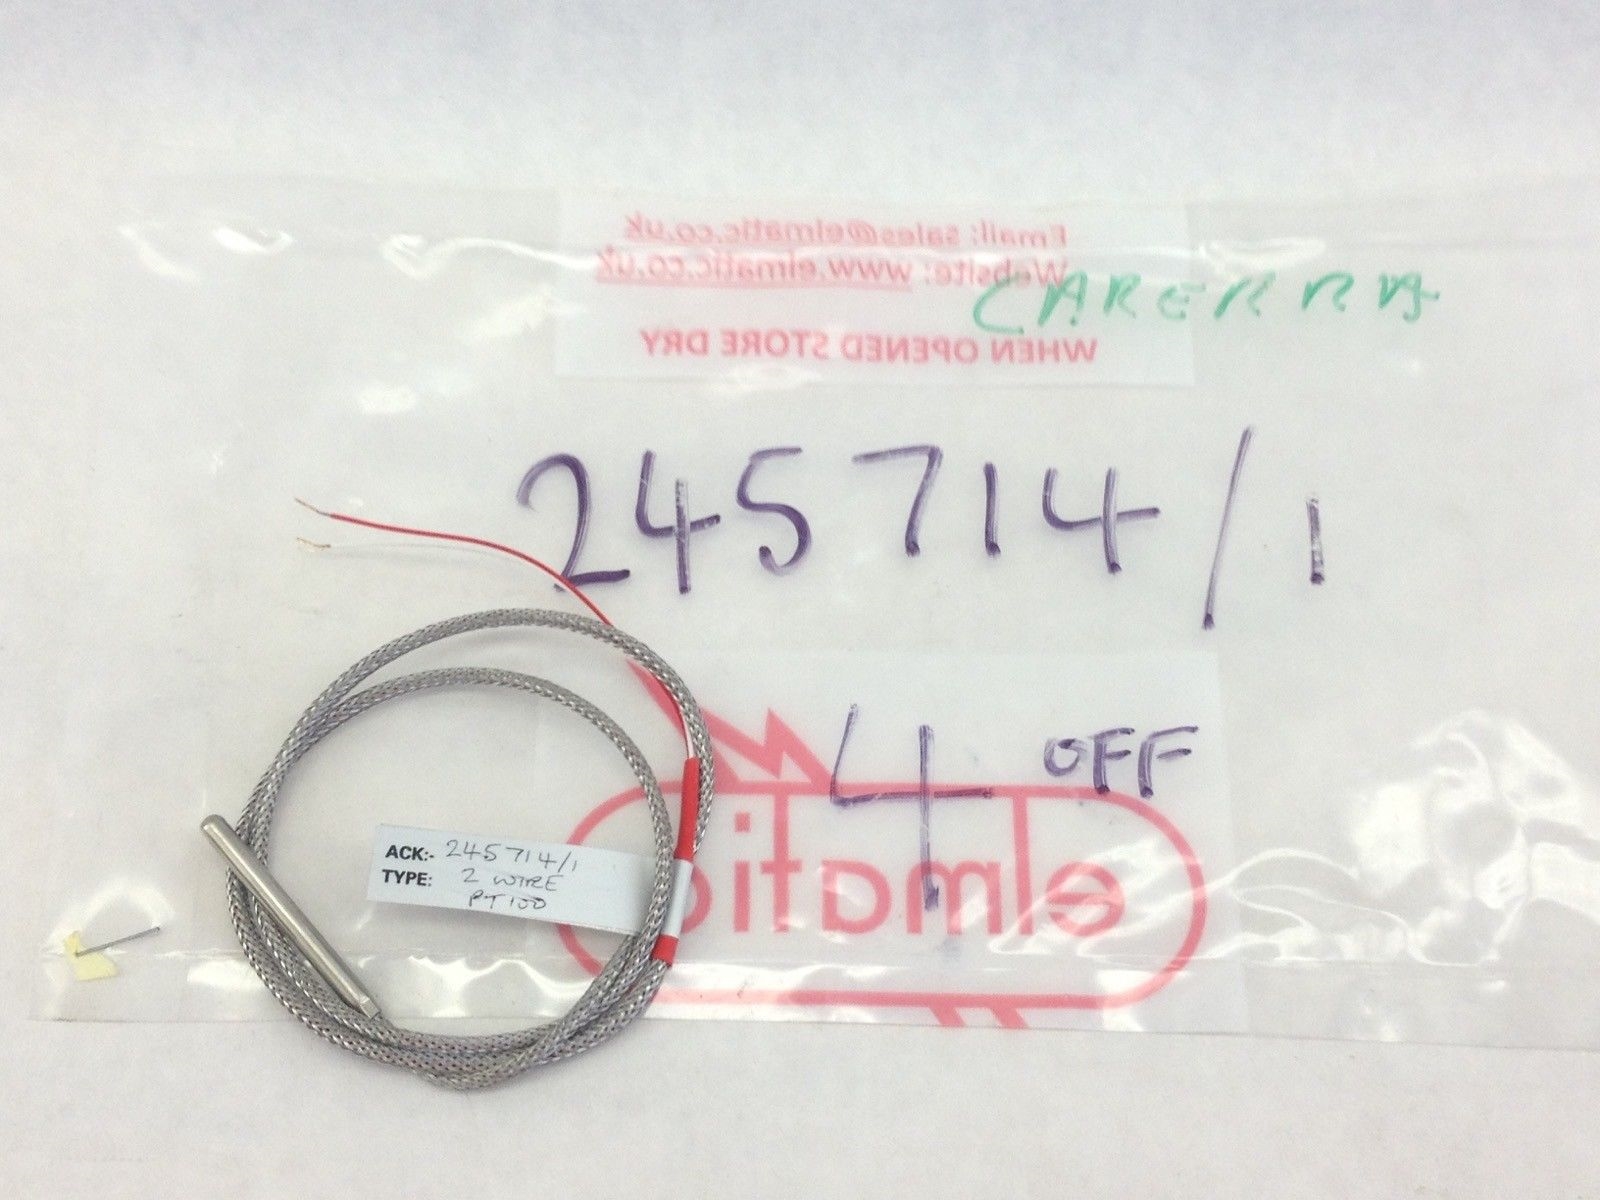 ELEMATIC PT100 245714/1 2-WIRE THERMOCOUPLE (H3) 2